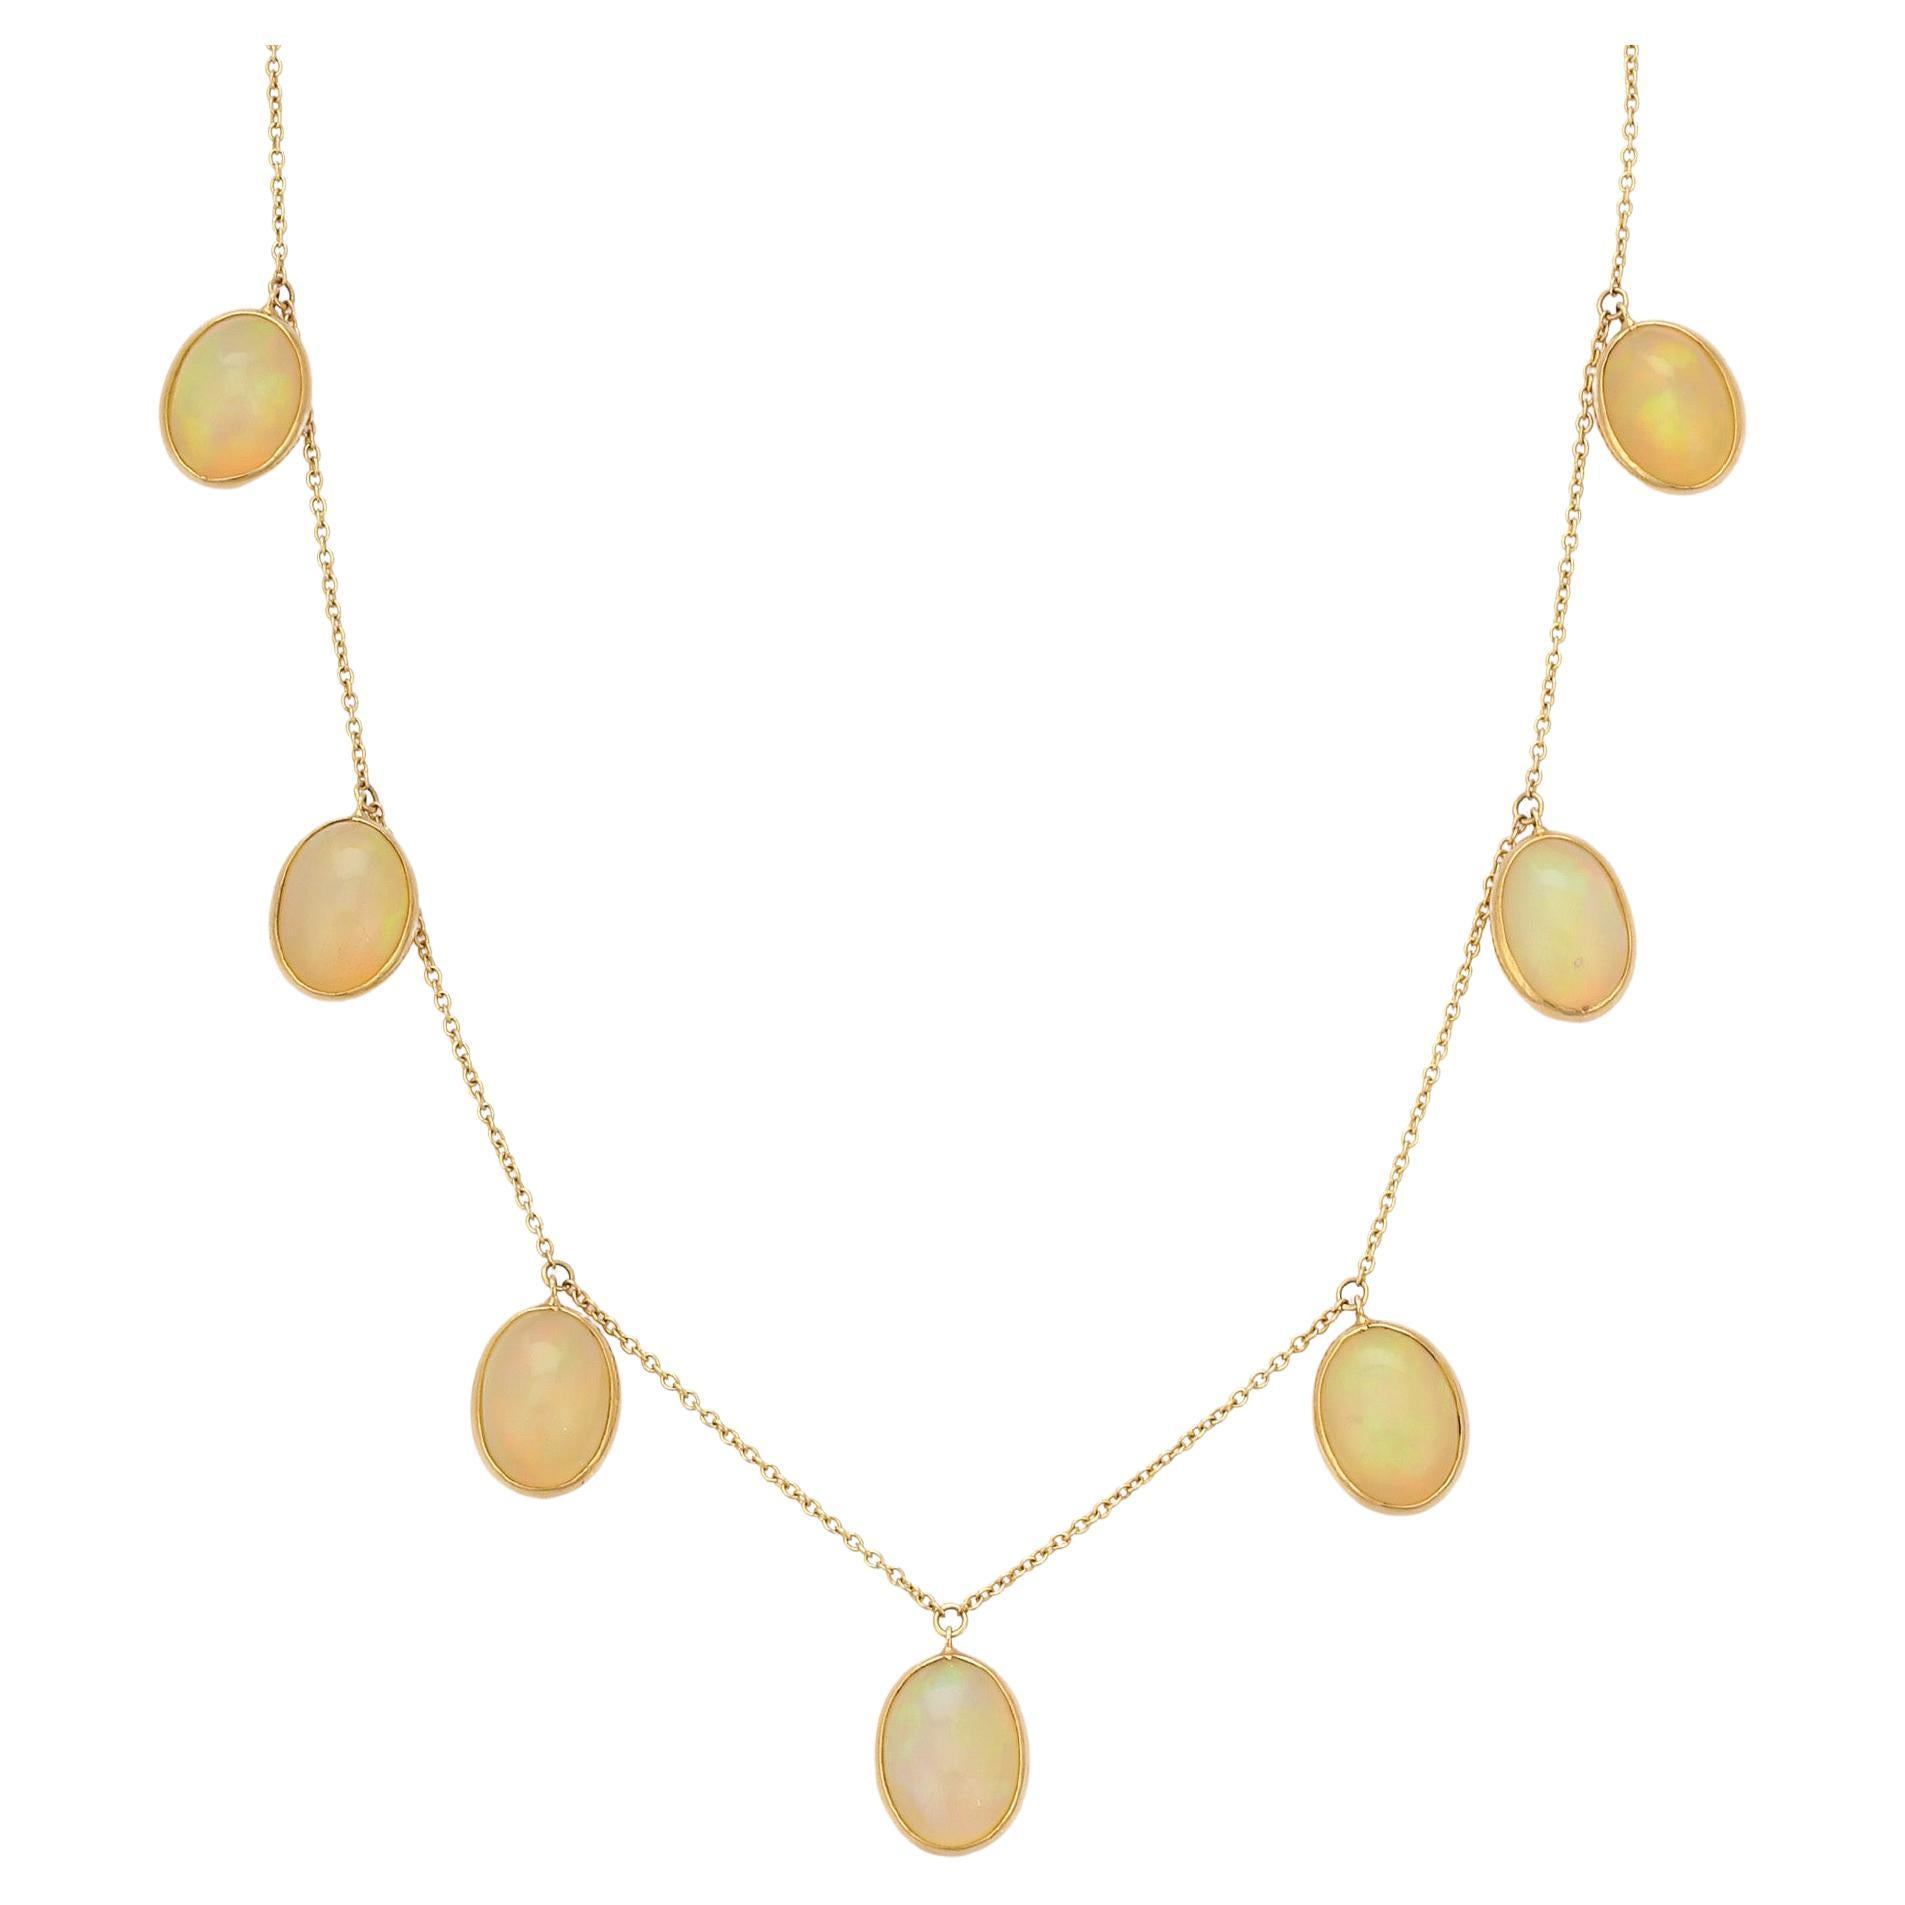 16.7 Ct Opal Necklace in 18K Yellow Gold Chain